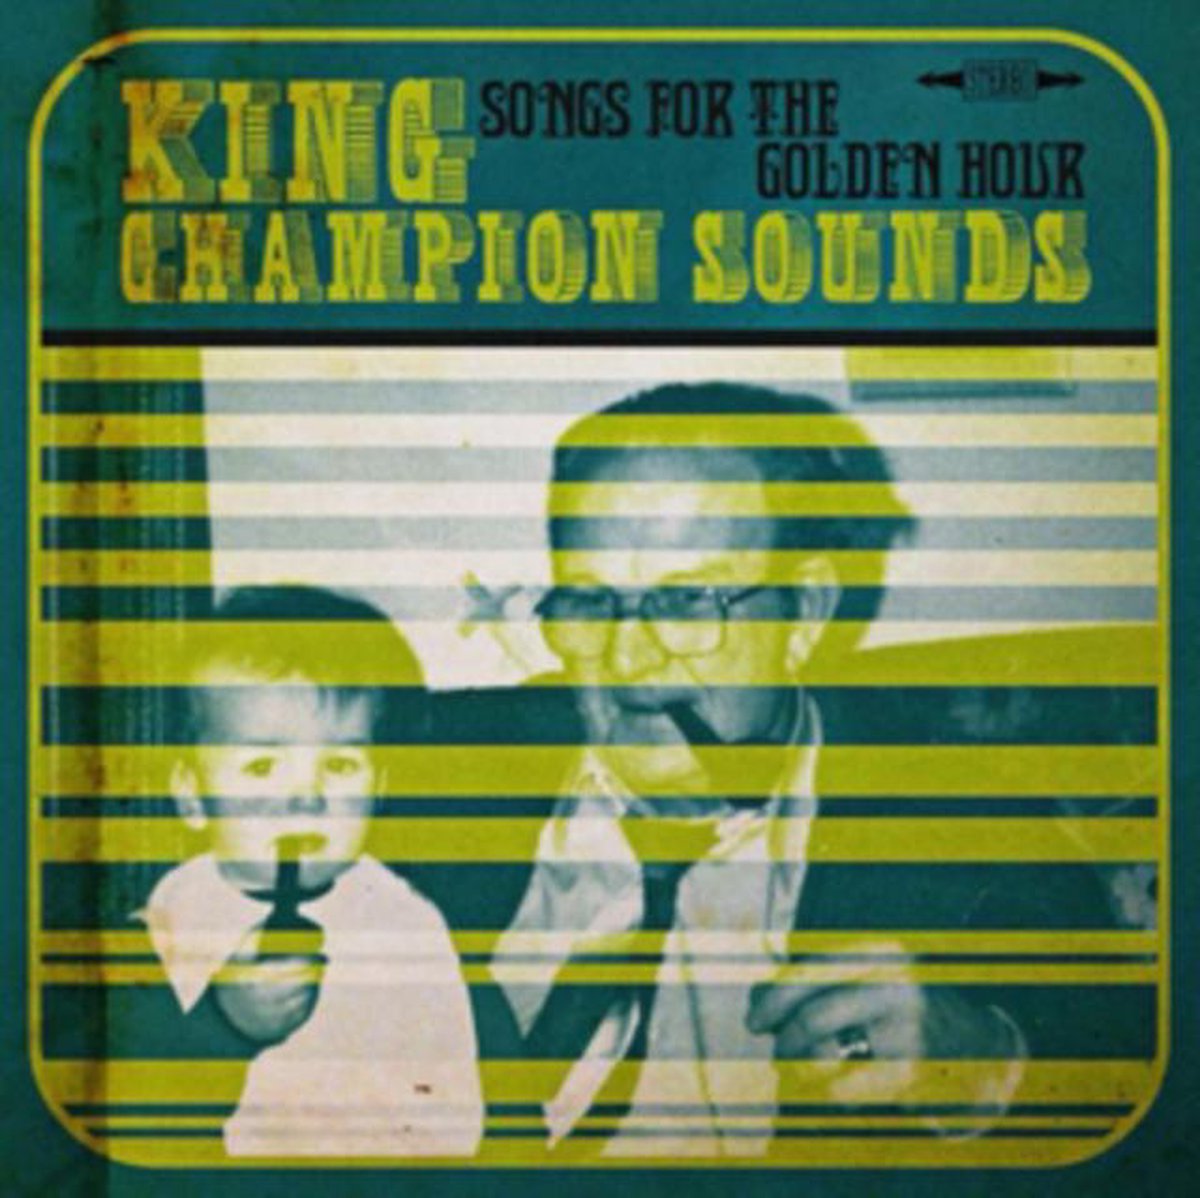 King Champion Sounds - Songs For The Golden Hour (2 10